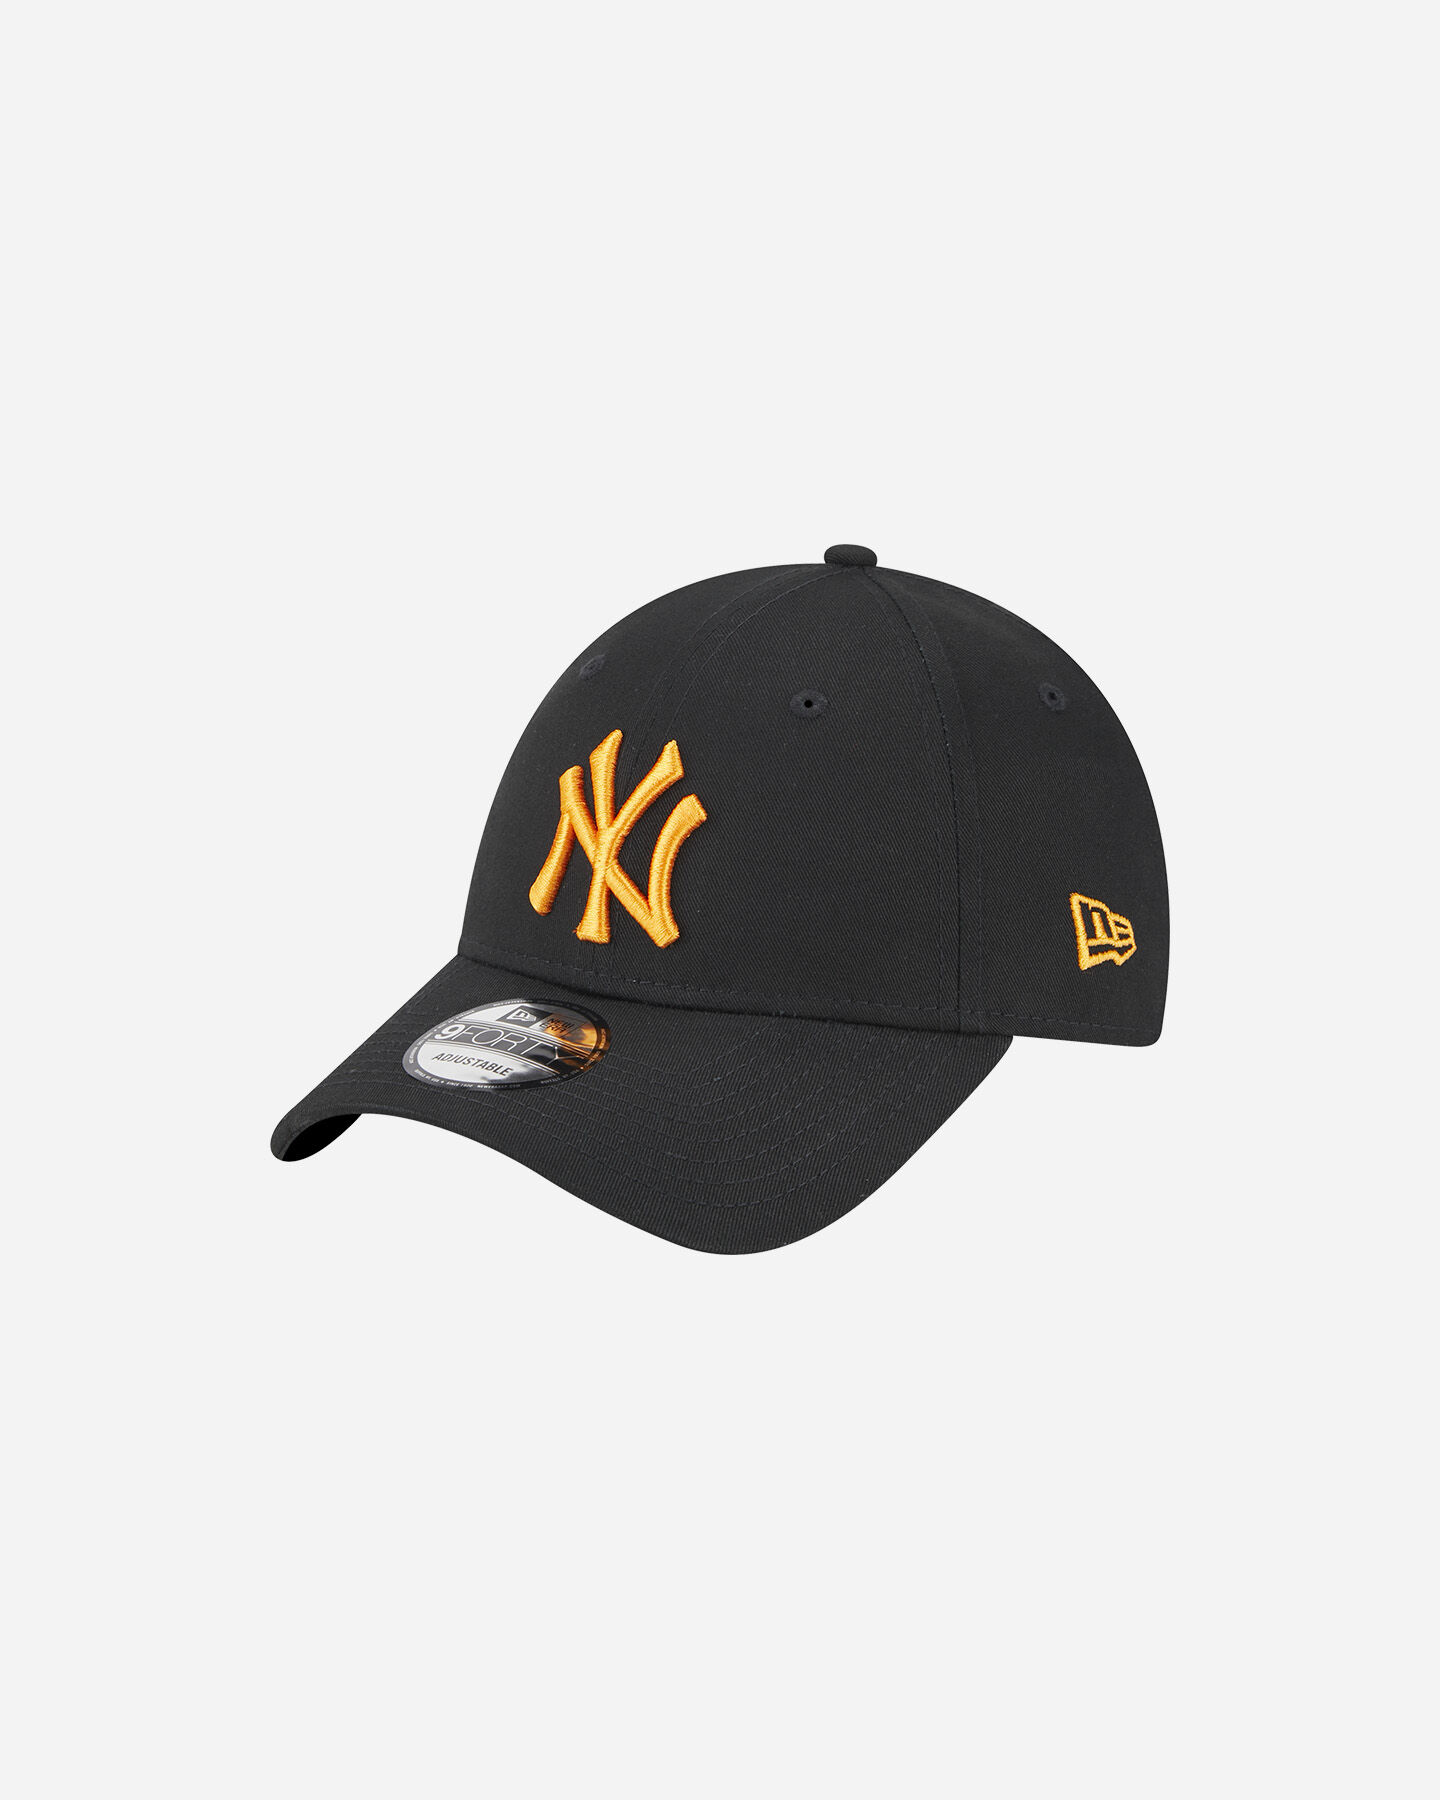  Cappellino NEW ERA 9FORTY MLB LEAGUE NEW YORK YANKEES  S5630961|001|OSFM scatto 0